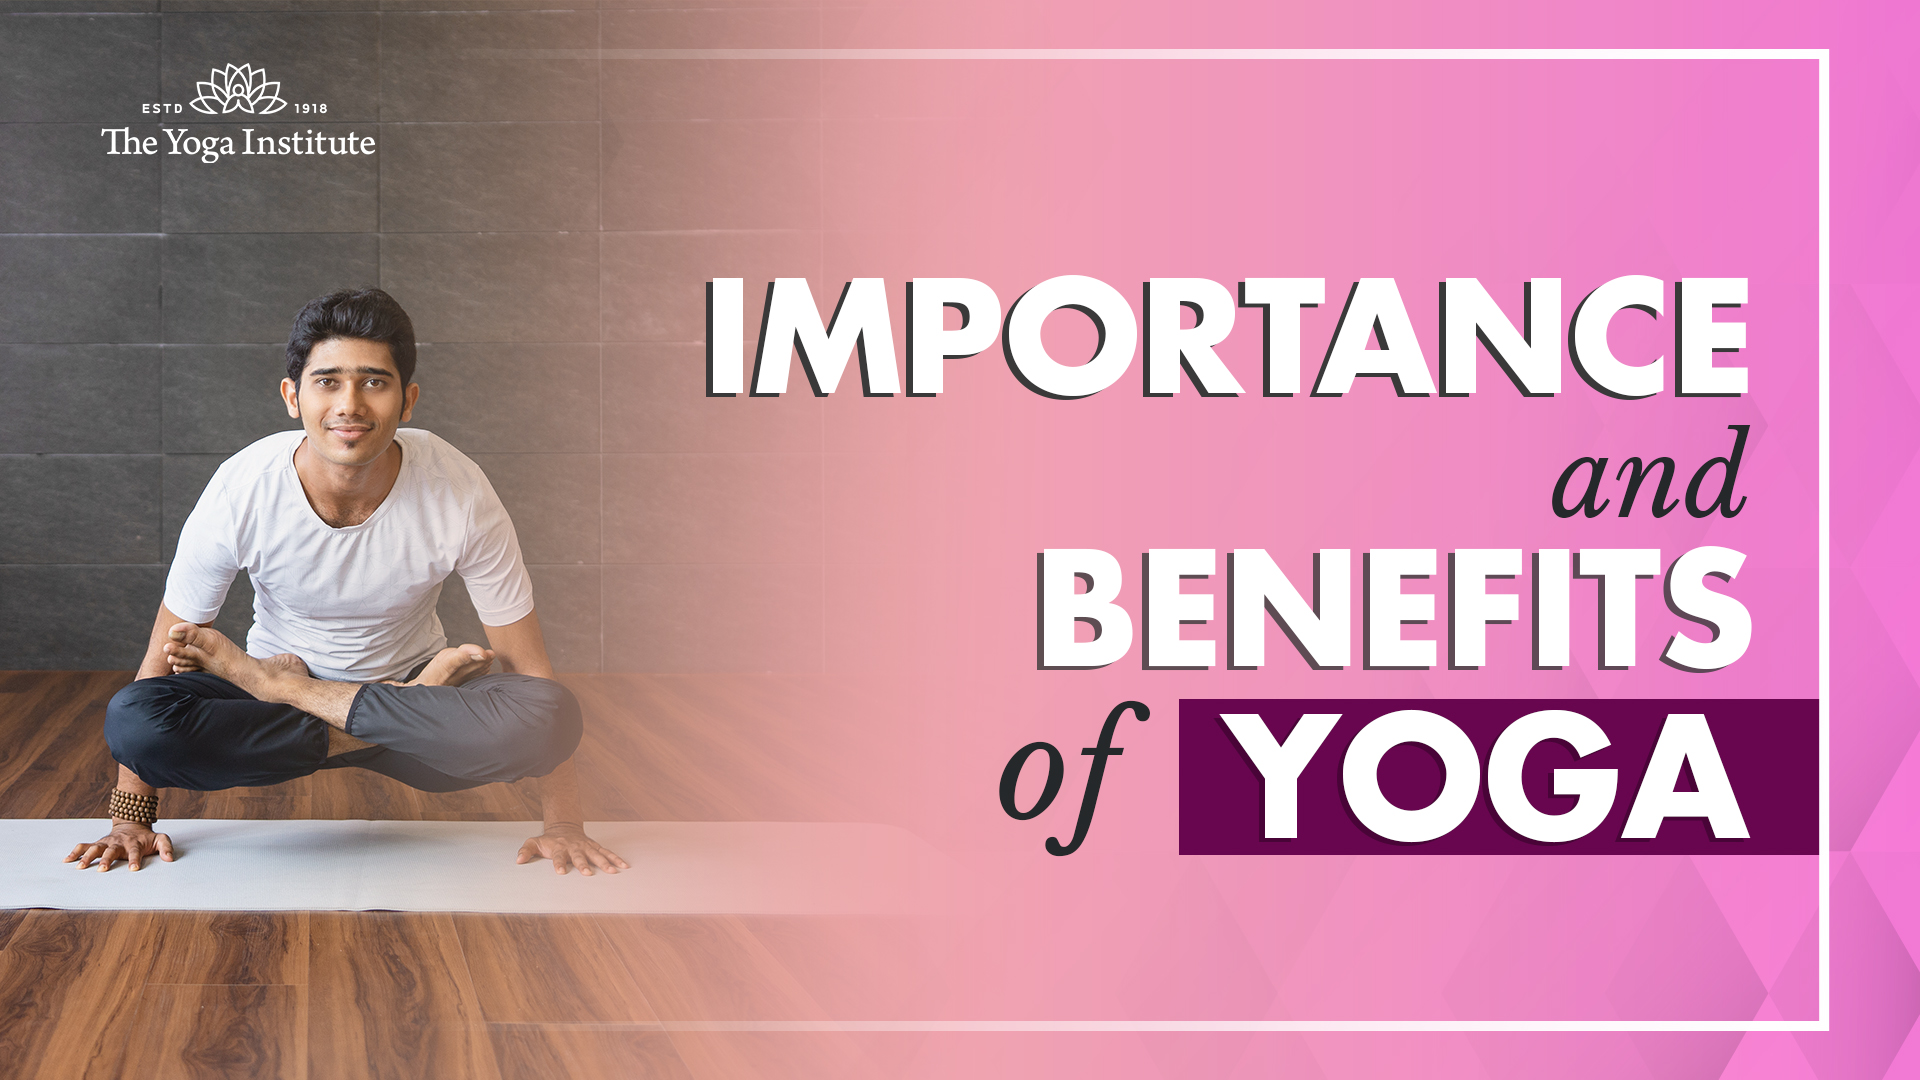 List Down The Benefits Of Yoga